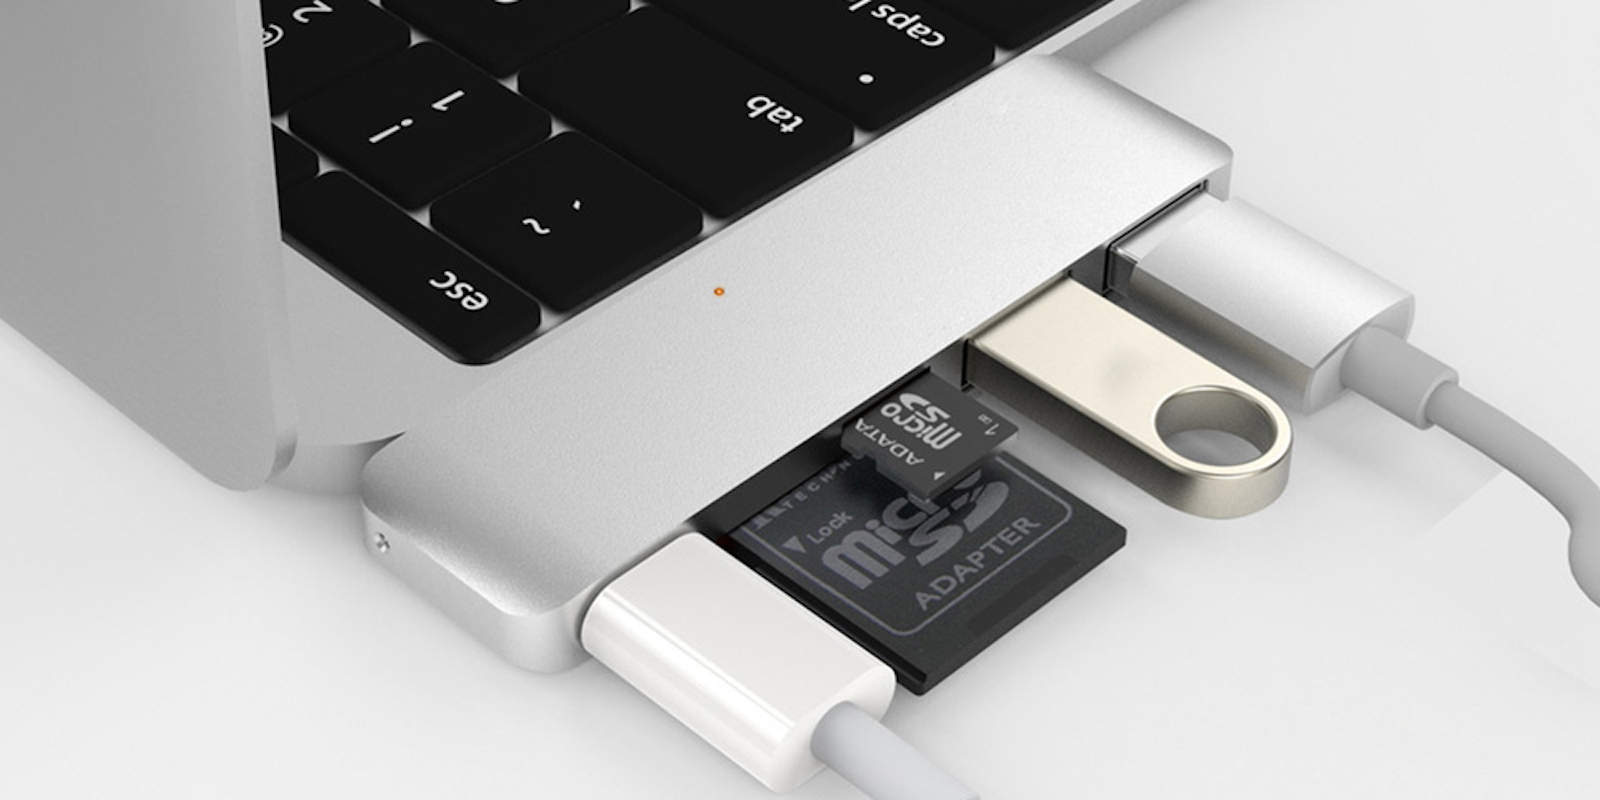 Make your new MacBook useful for your old peripherals with this sleek, 5-port hub.